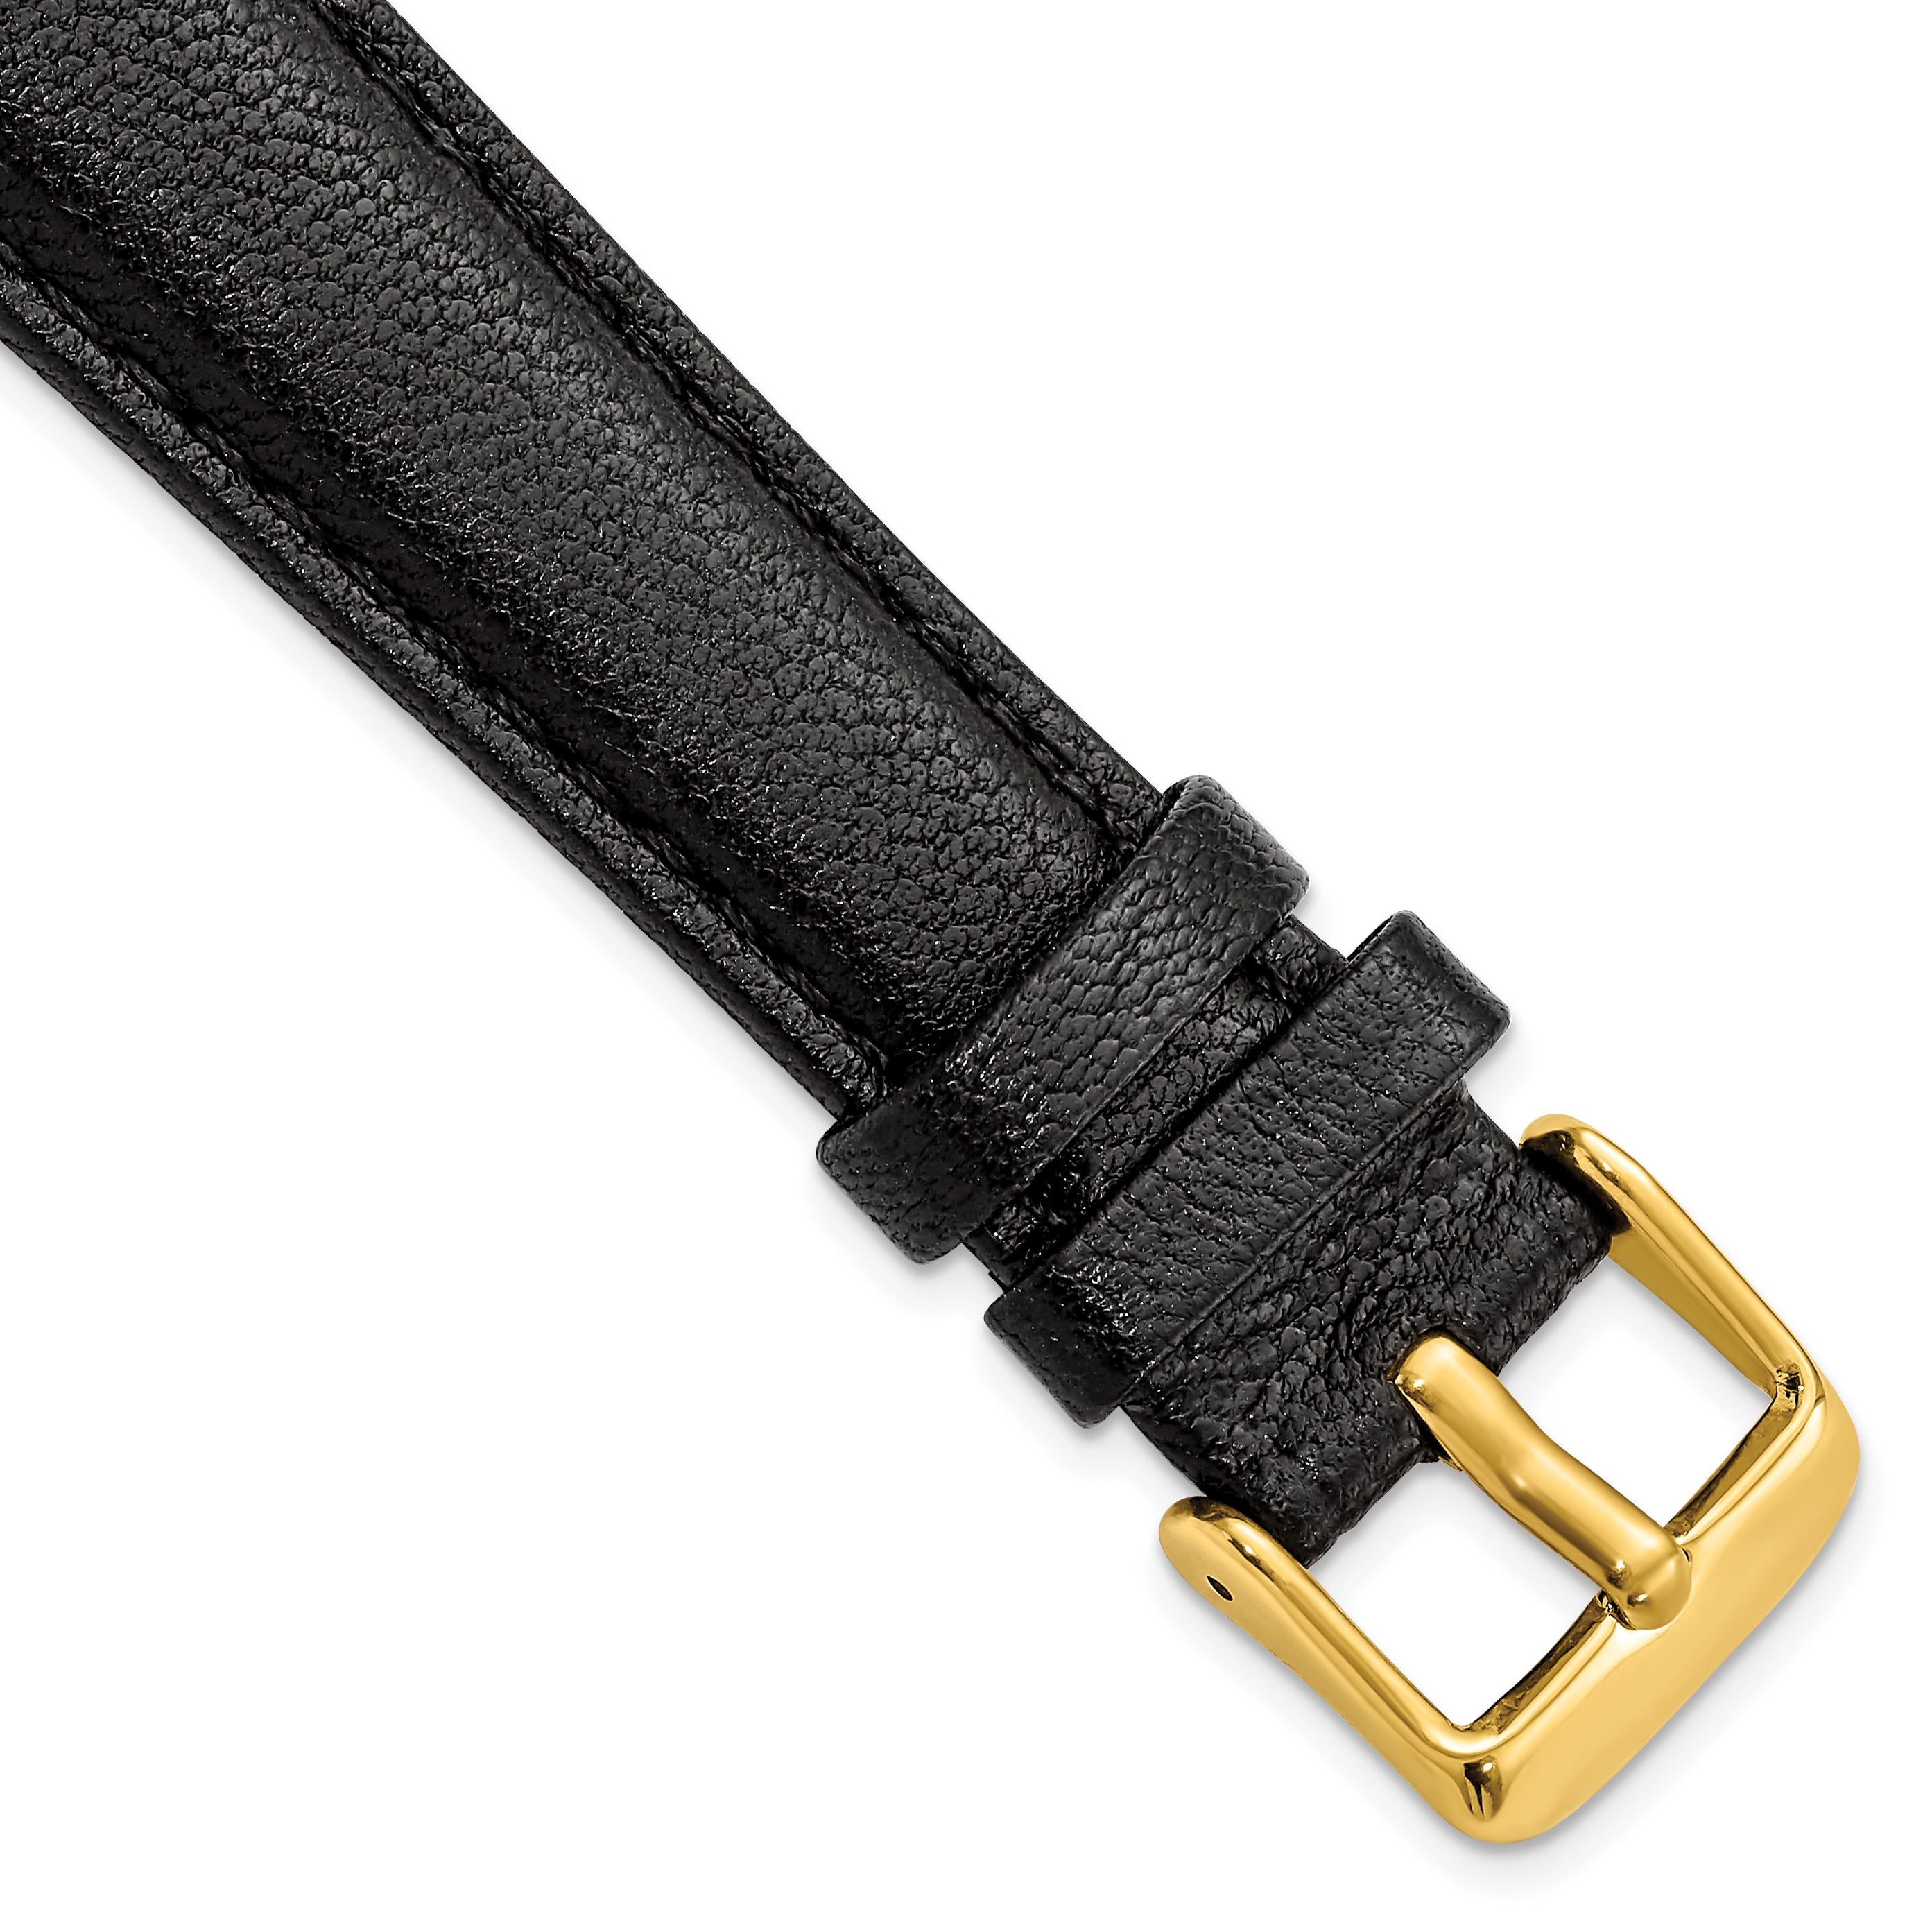 DeBeer 19mm Black Glove Leather with Gold-tone Panerai Style Buckle 7.75 inch Watch Band